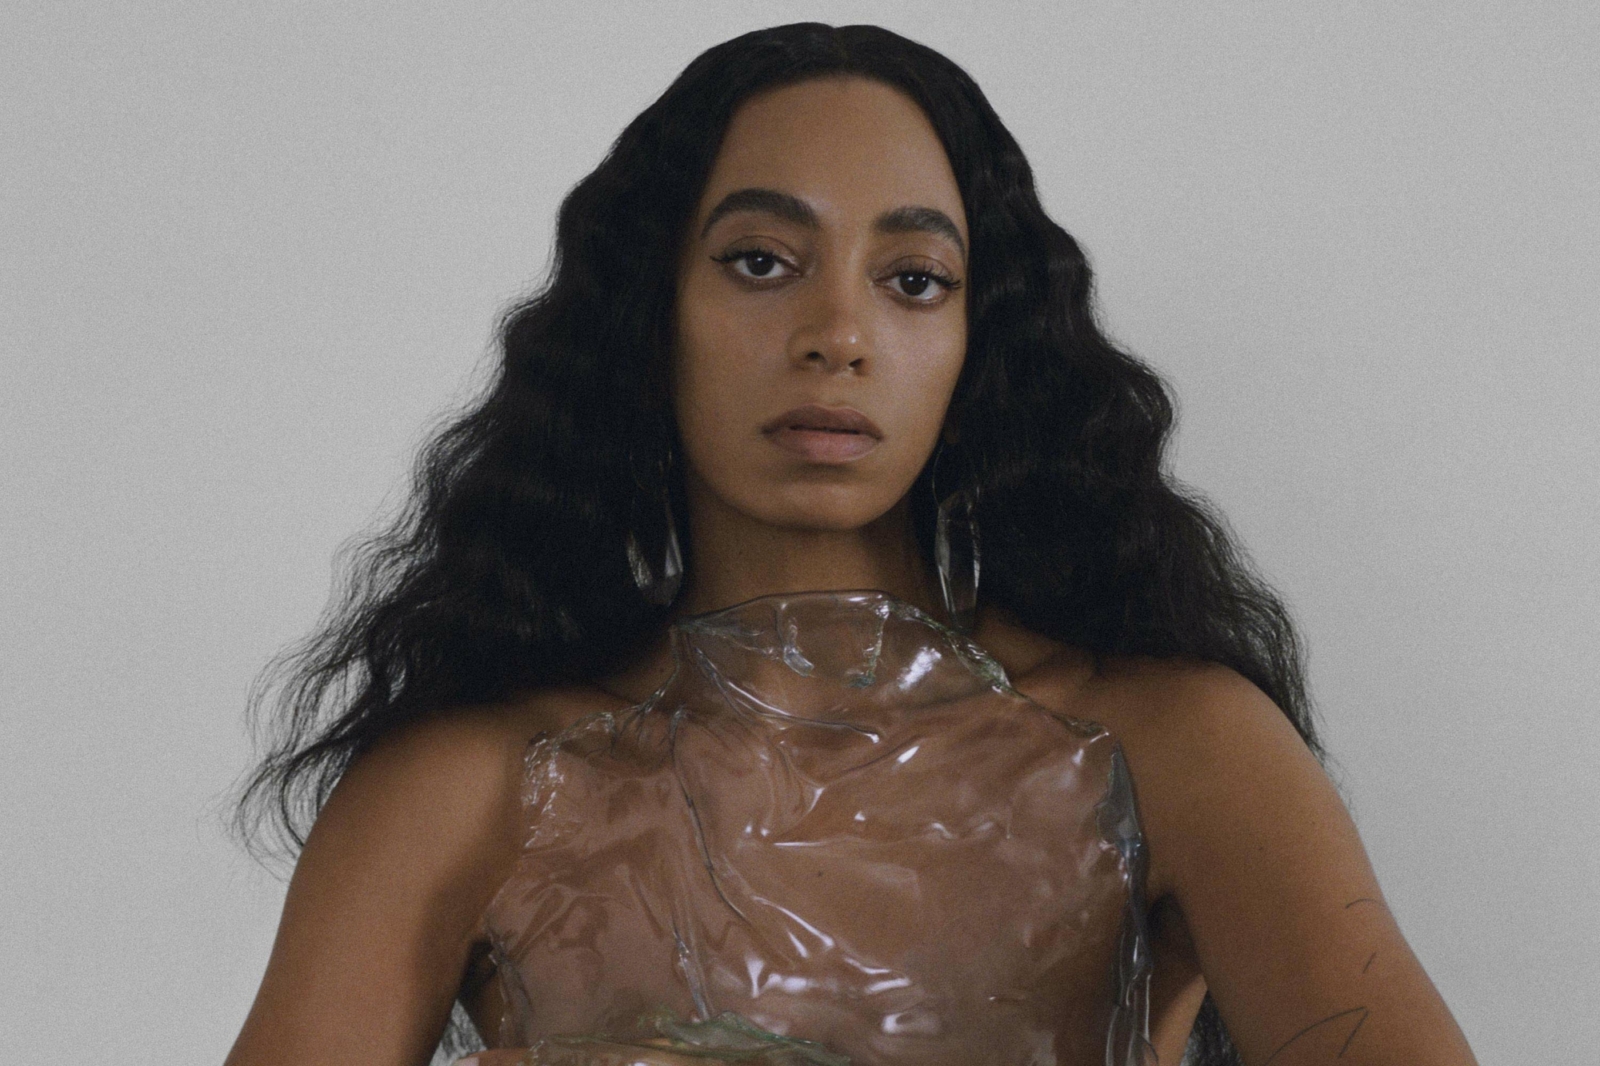 Solange has composed a score for New York City Ballet